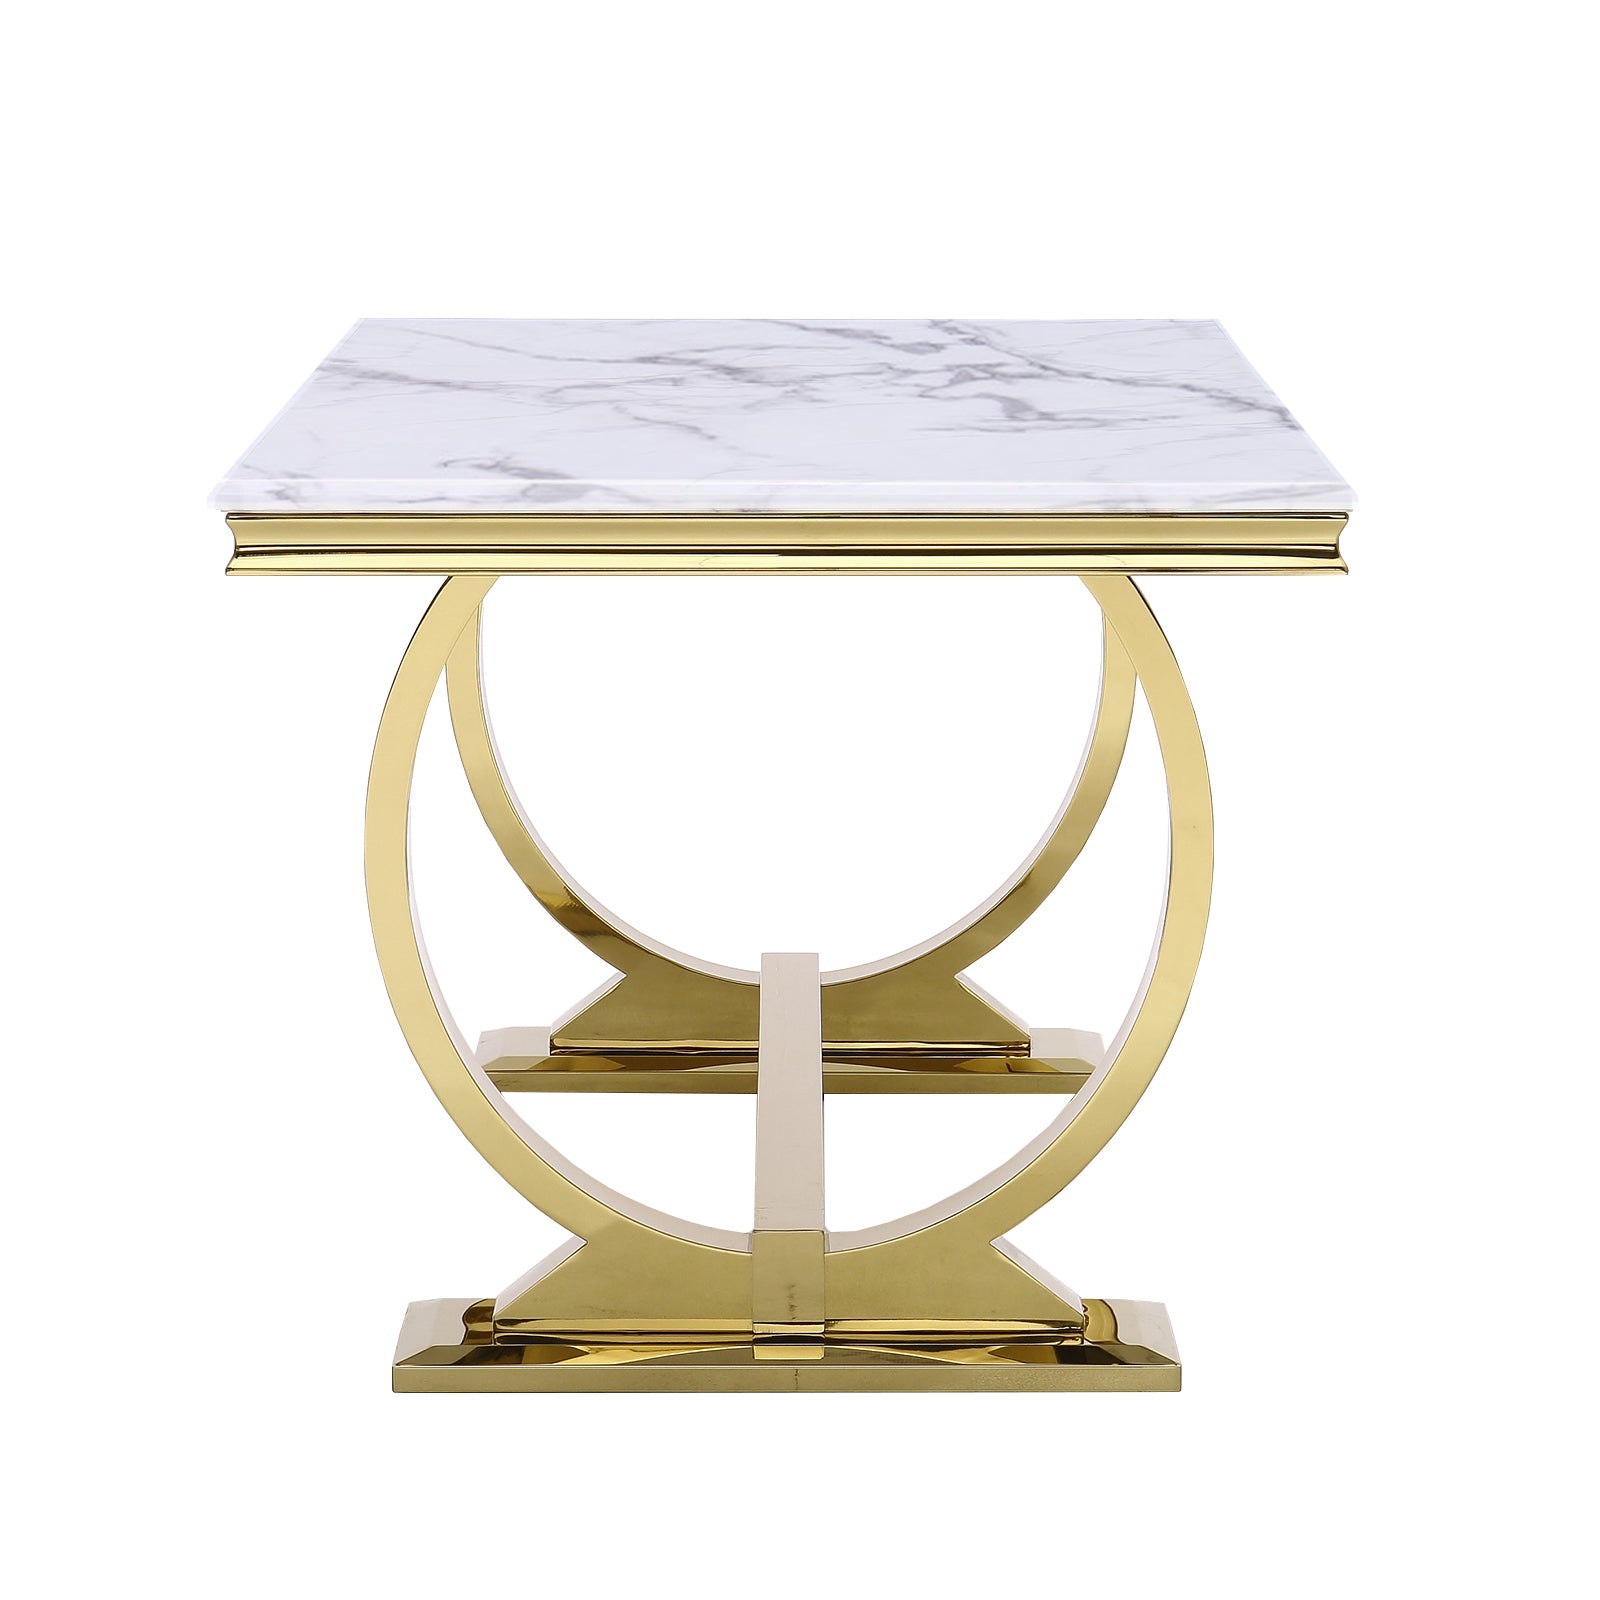 605-Set | AUZ White and Gold Dining room Sets for 6